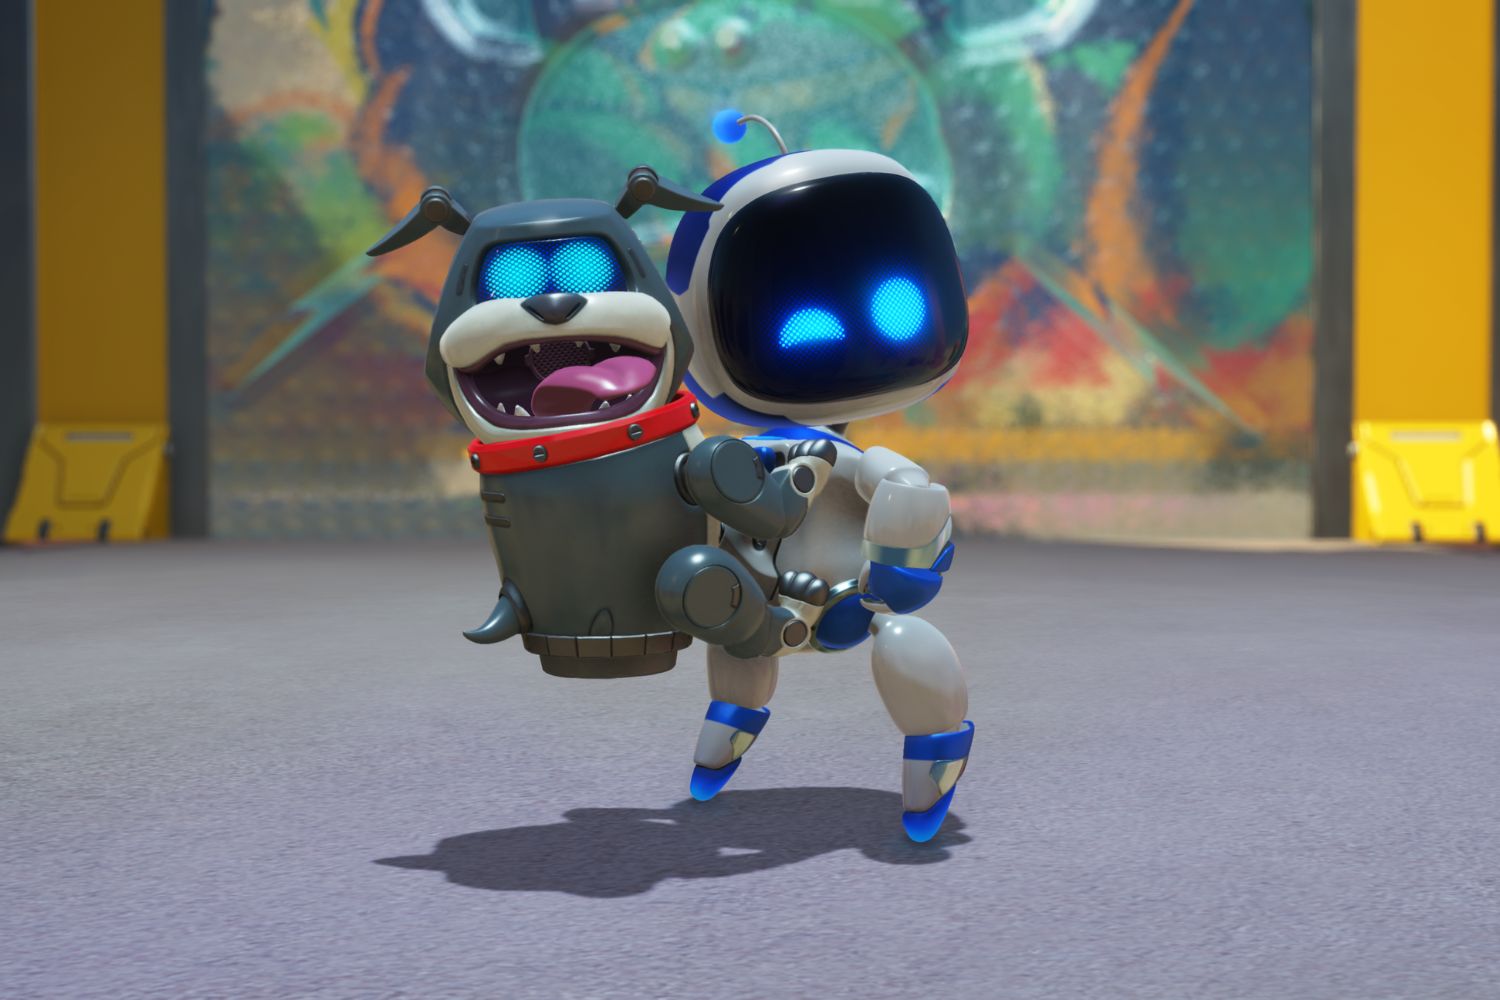 Astro Bot Competence